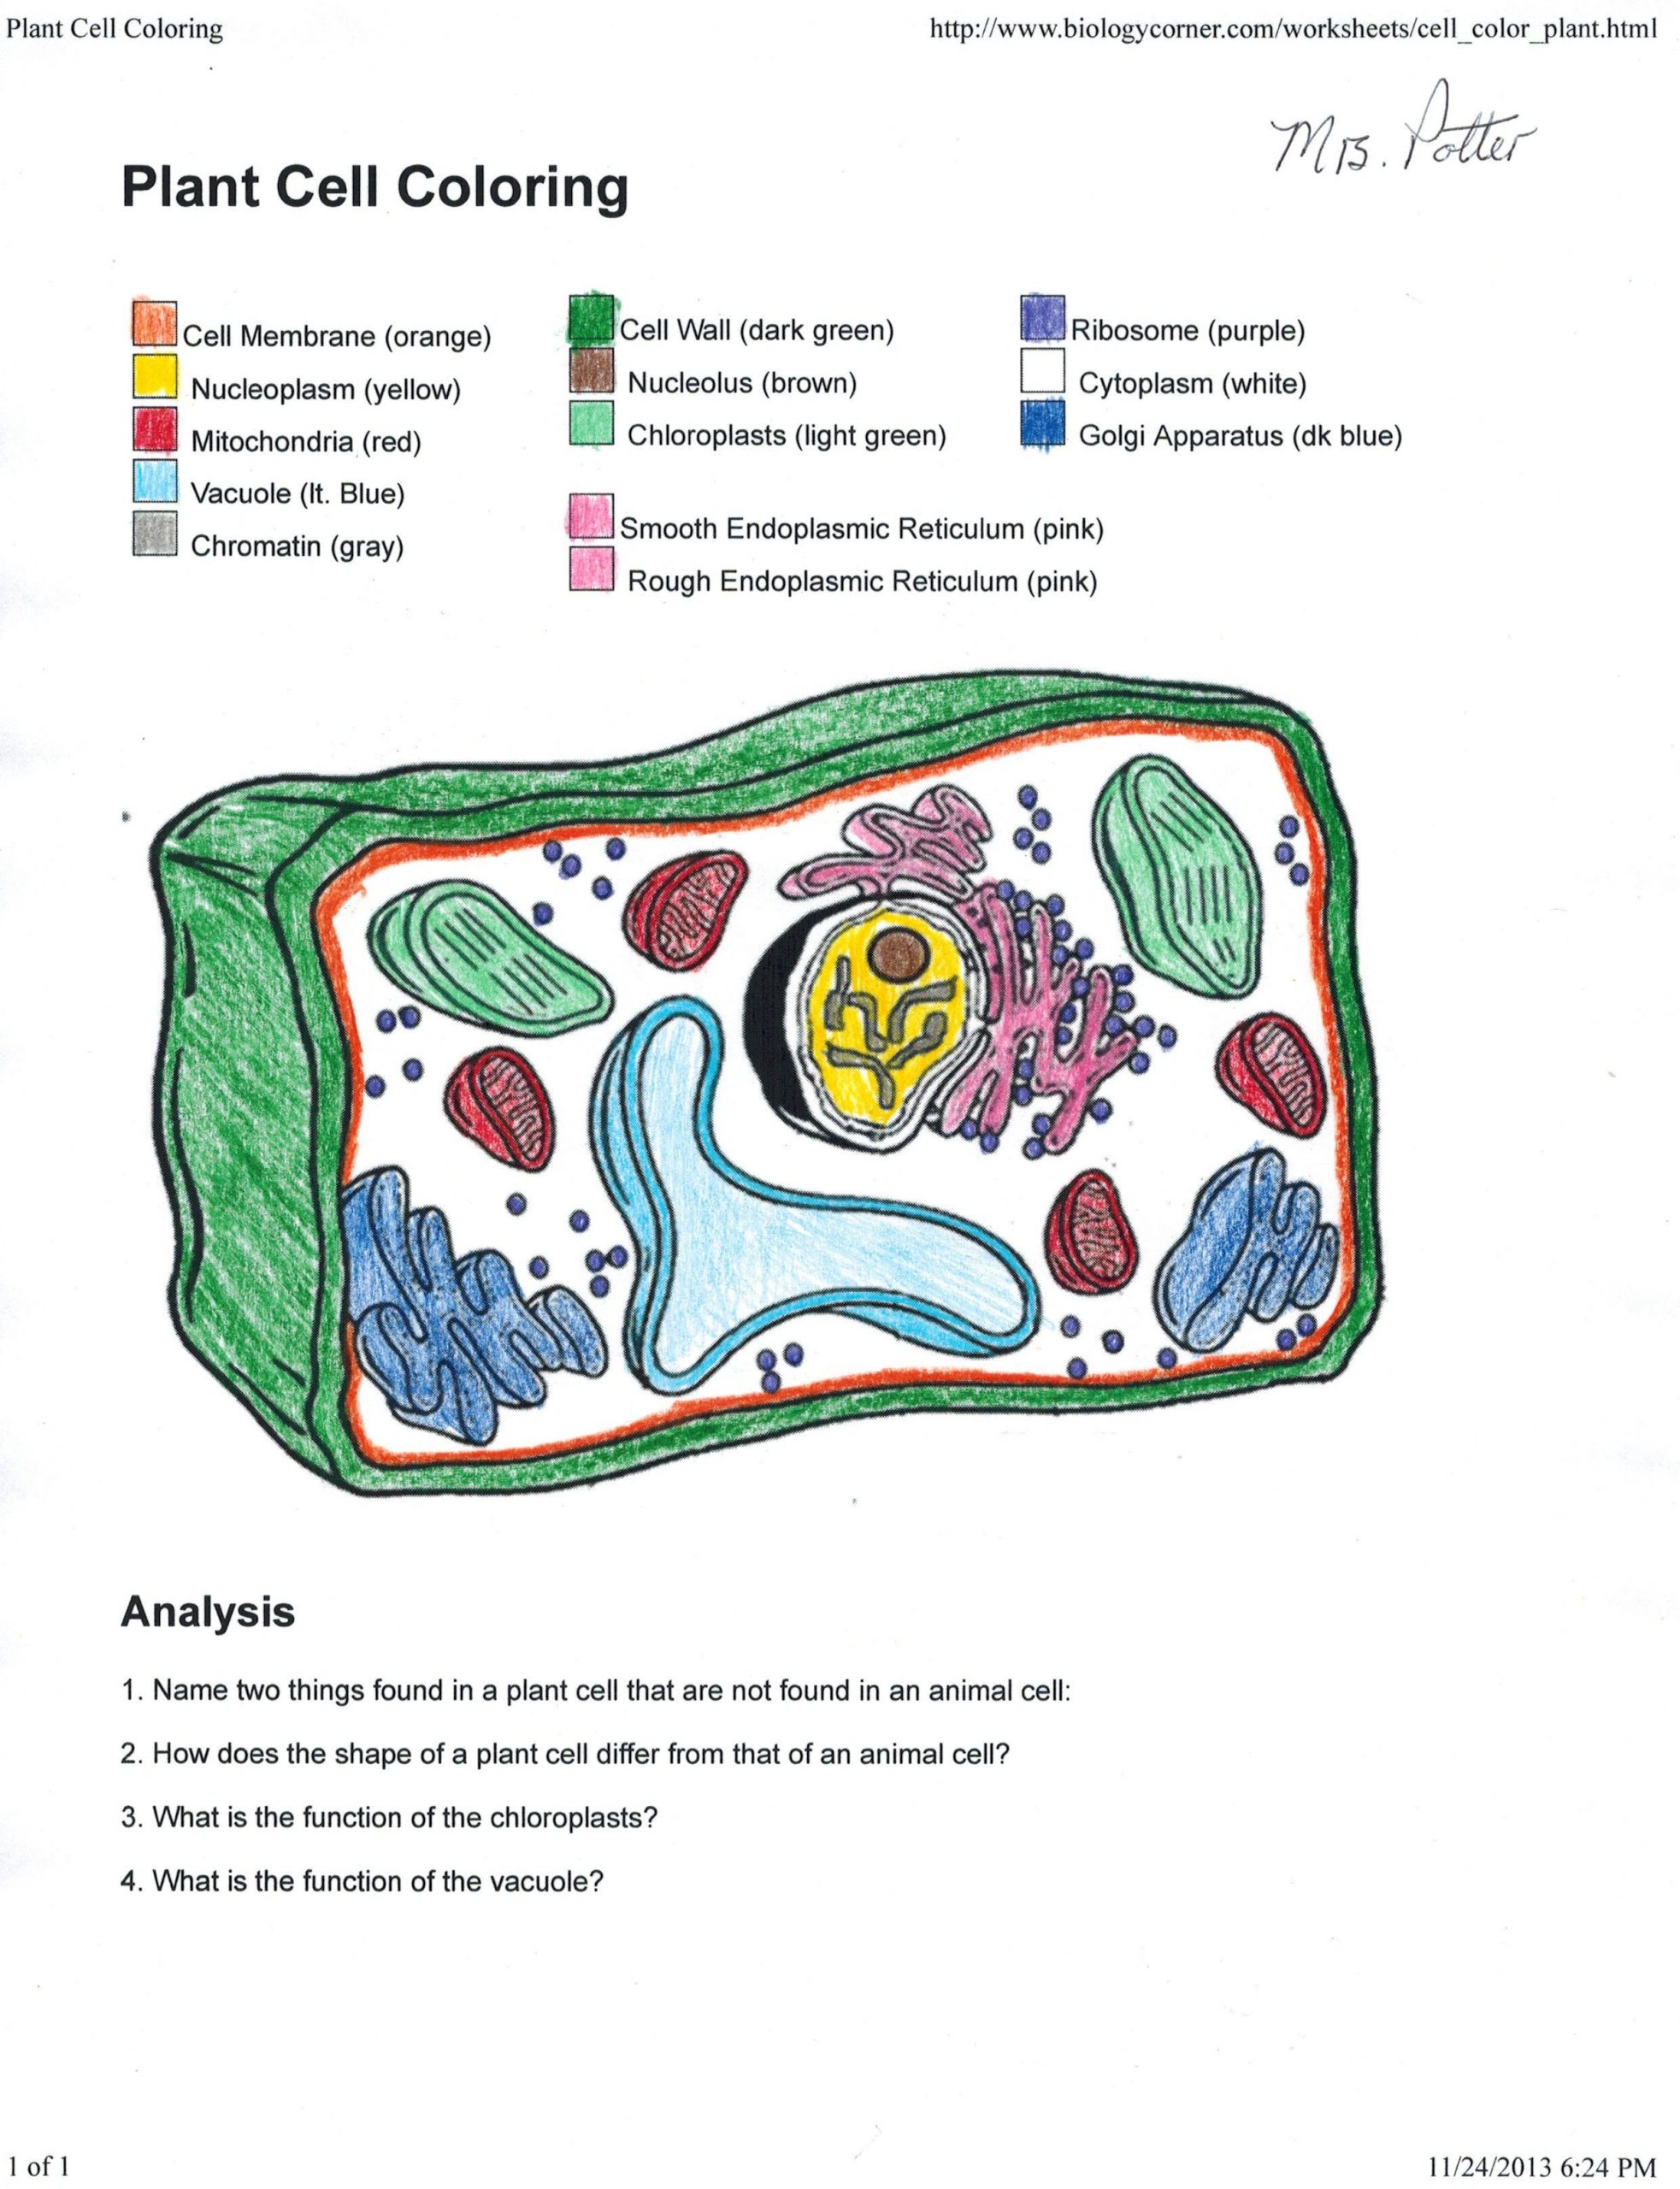 Animal Cells Coloring Worksheet Trends for Plant Cell Coloring Answer Sheet